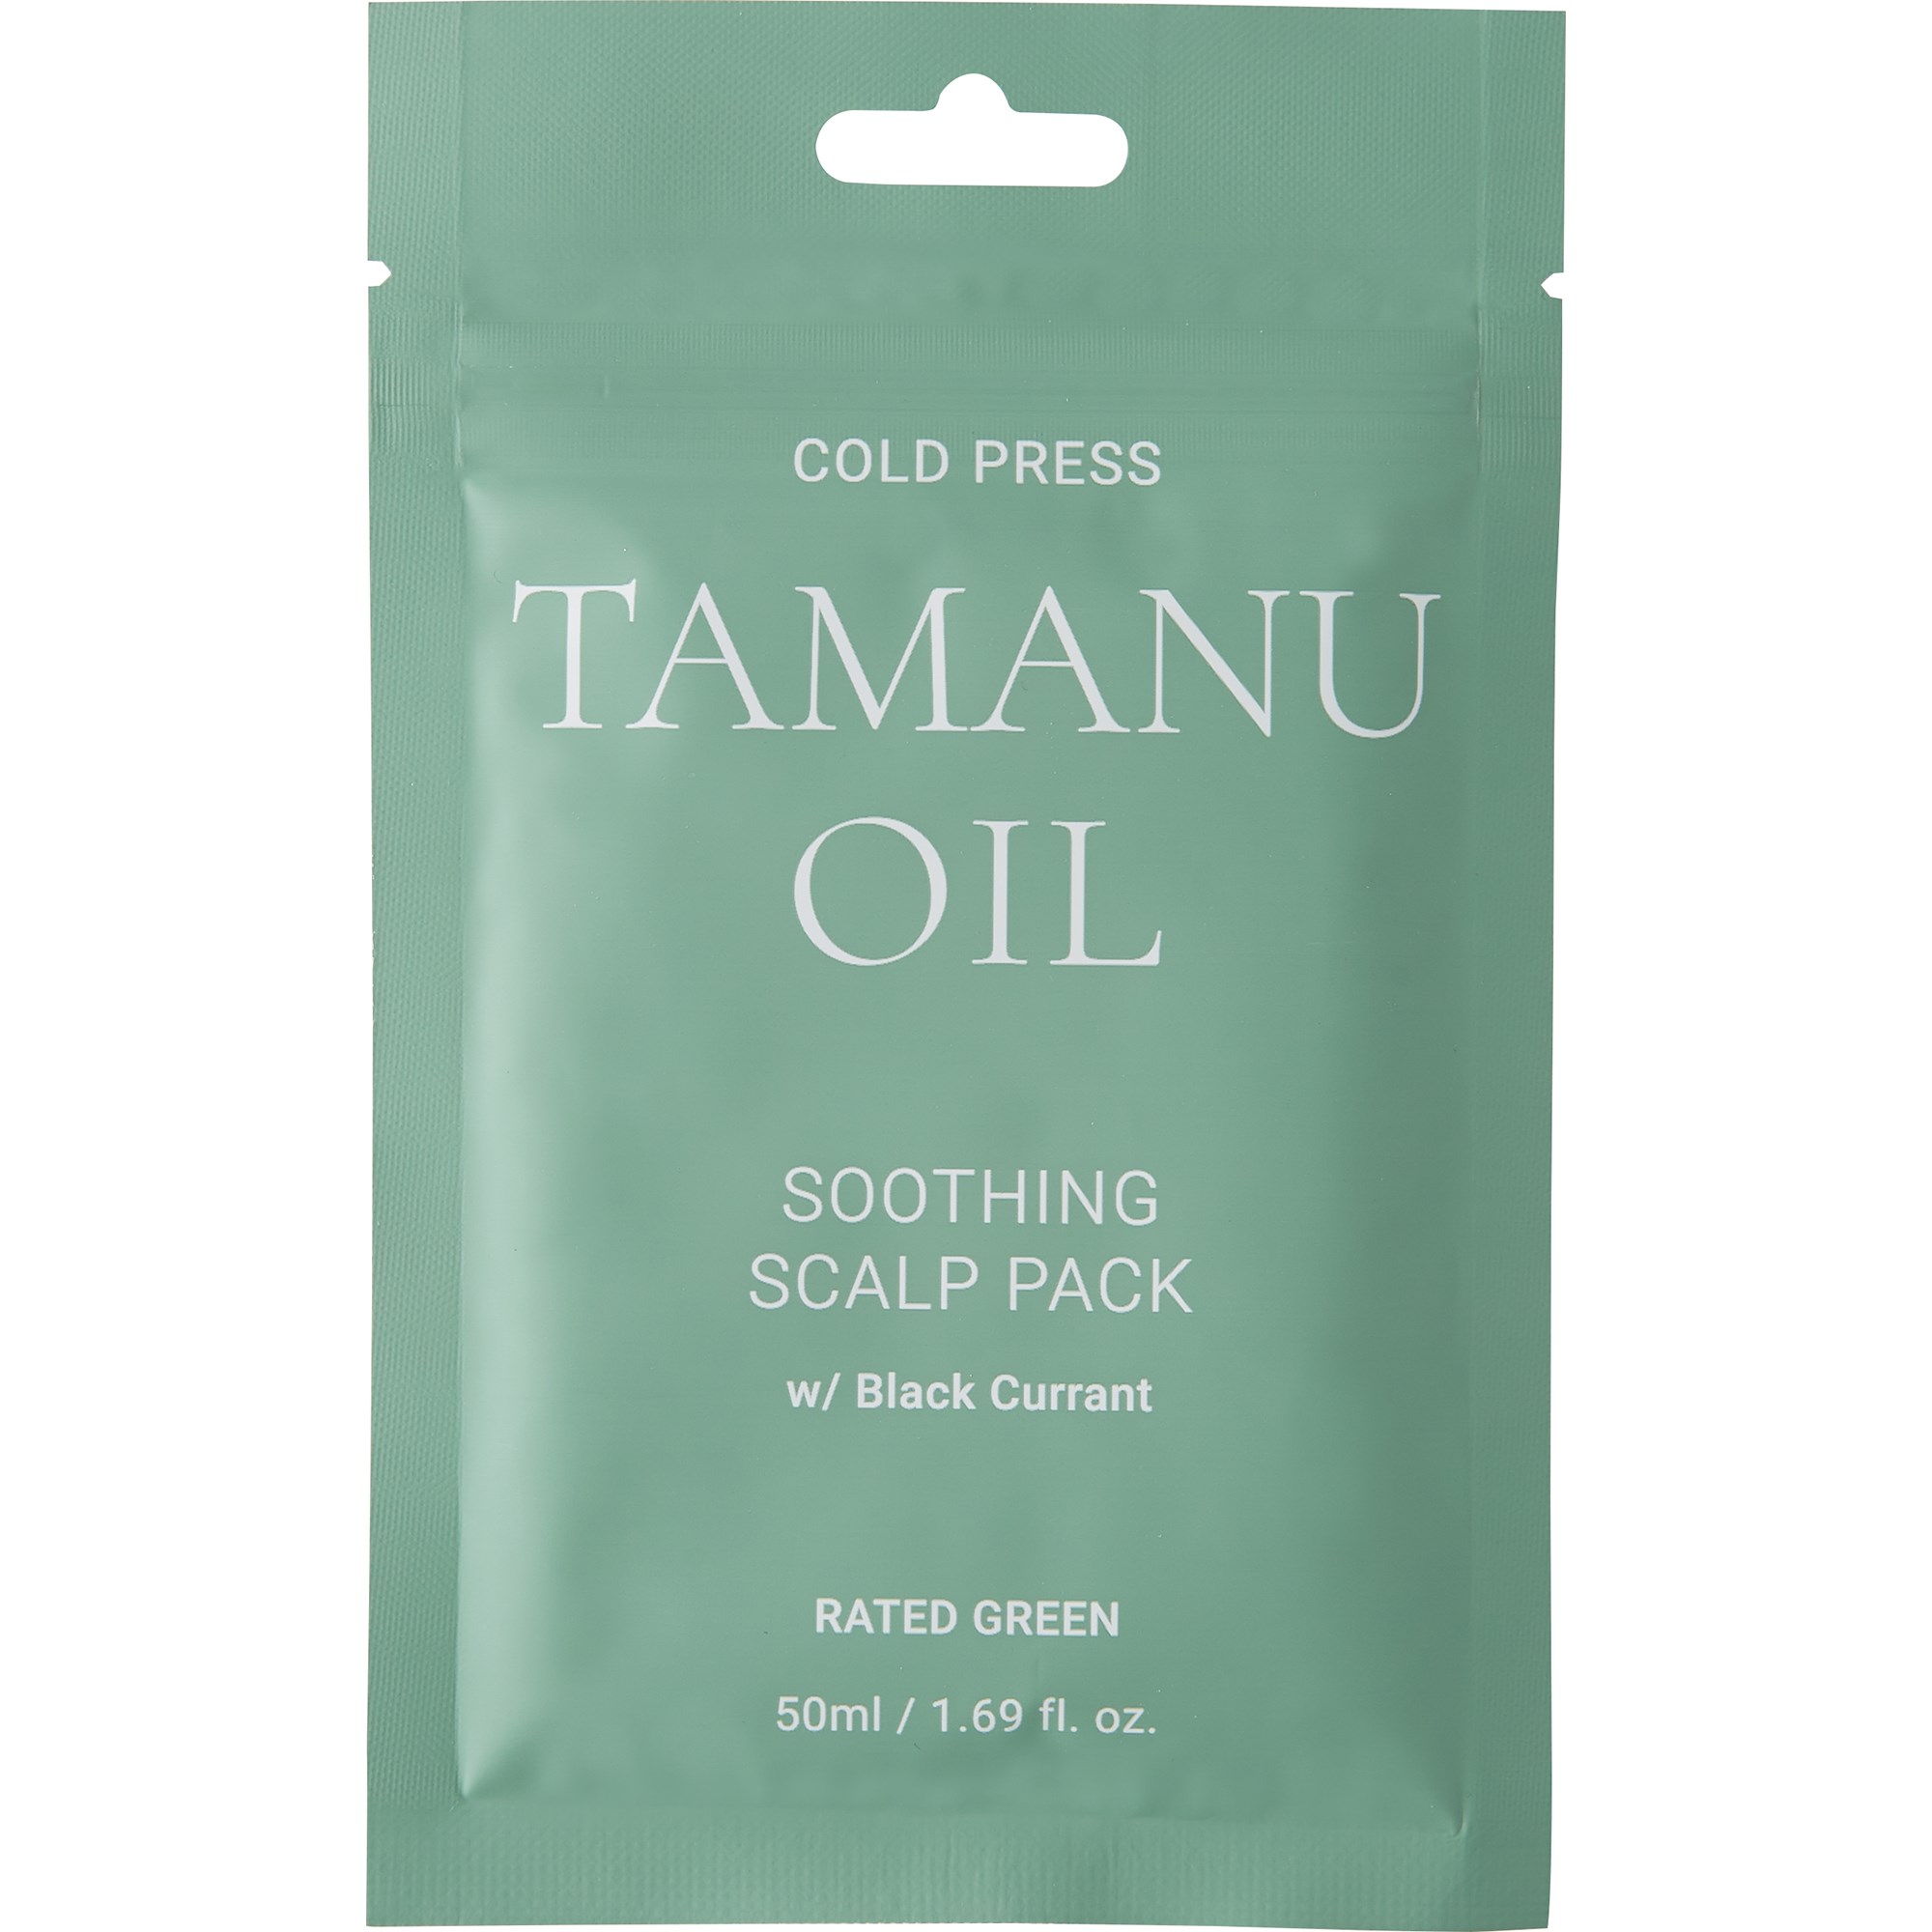 Läs mer om Rated Green Scalp Pack Cold Press Tamanu Oil Soothing Scalp Pack Black